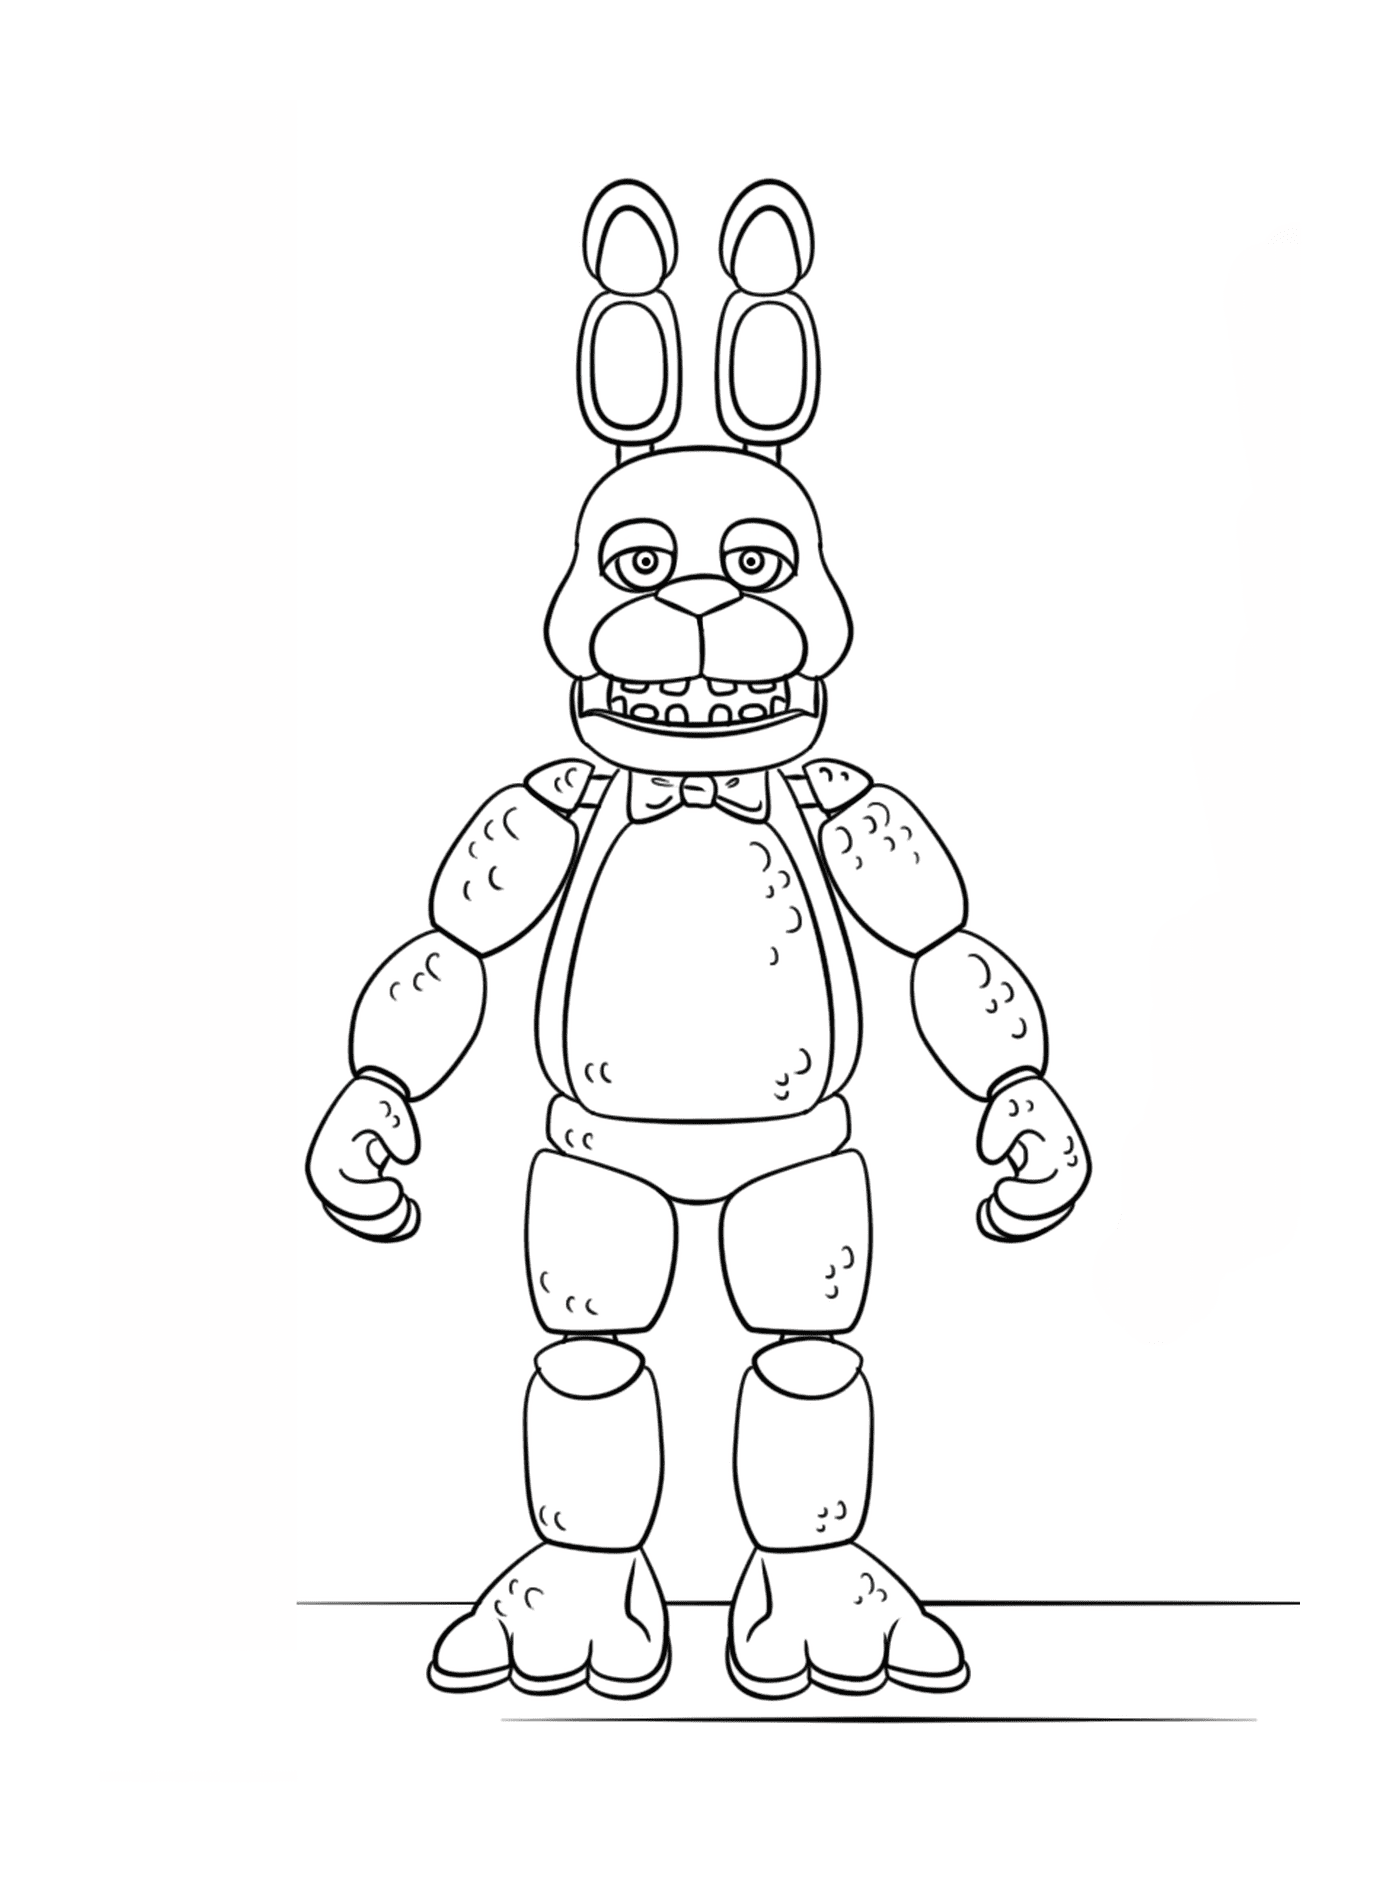  A toy resembling Toy Bonnie 